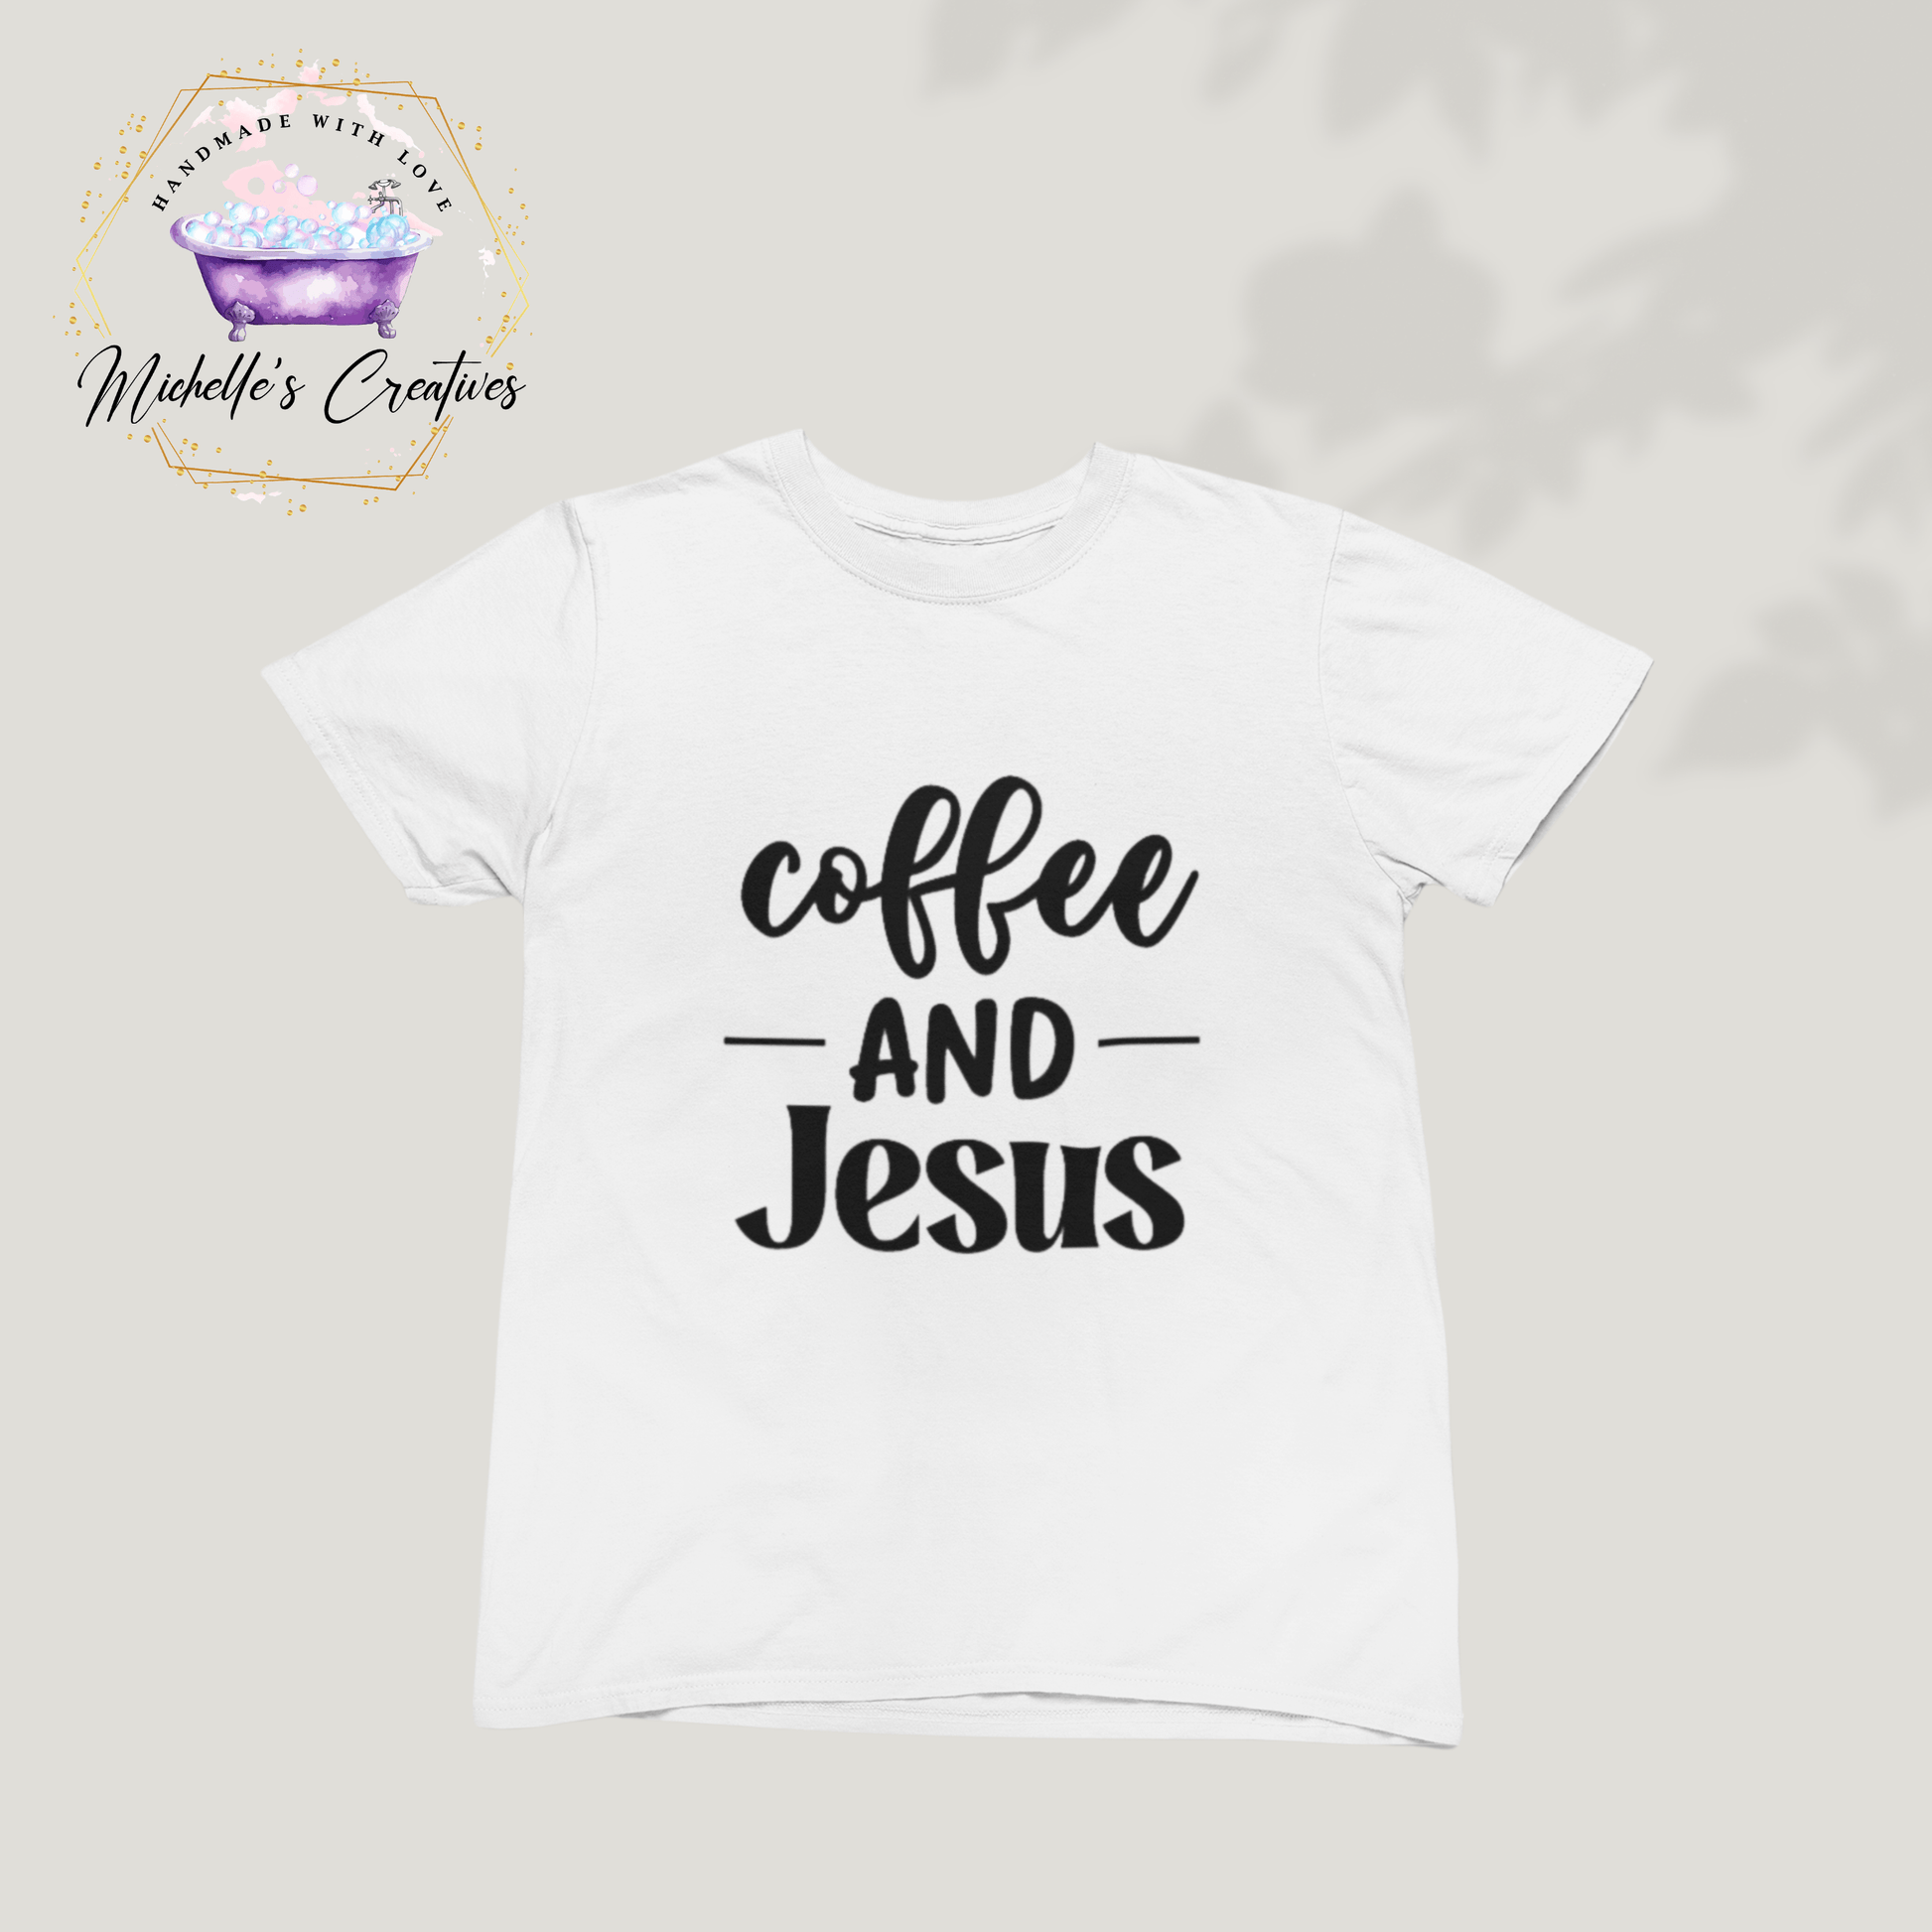 Michelle's Creatives T-shirt Small / White ☕🙏 Introducing the Coffee AND Jesus Unisex T-shirt! 🙏☕ COFFEE-AND-JESUS-TSHIRT-1